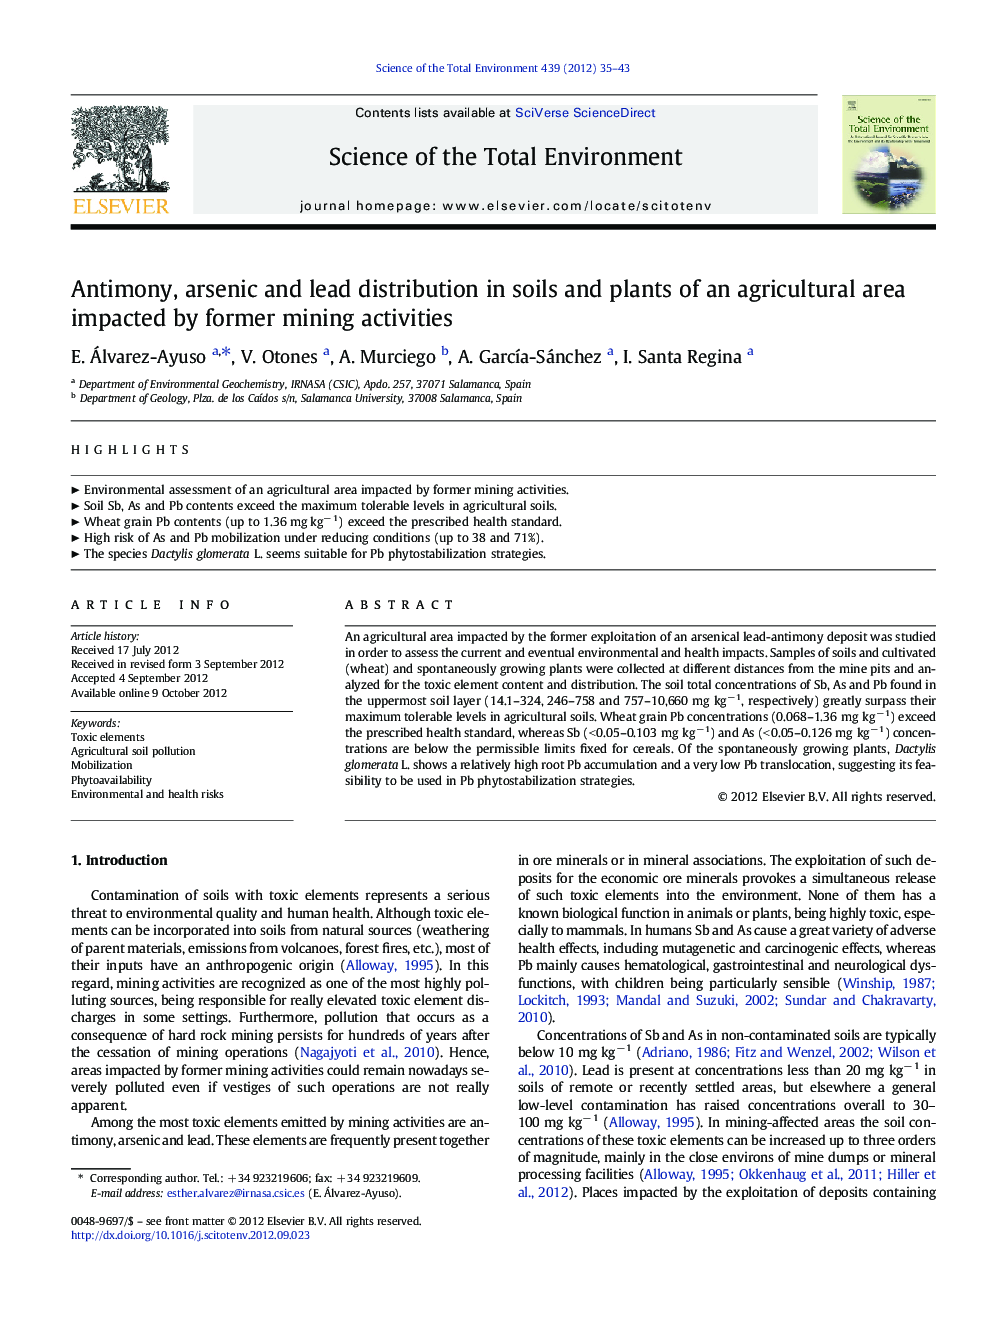 Antimony, arsenic and lead distribution in soils and plants of an agricultural area impacted by former mining activities